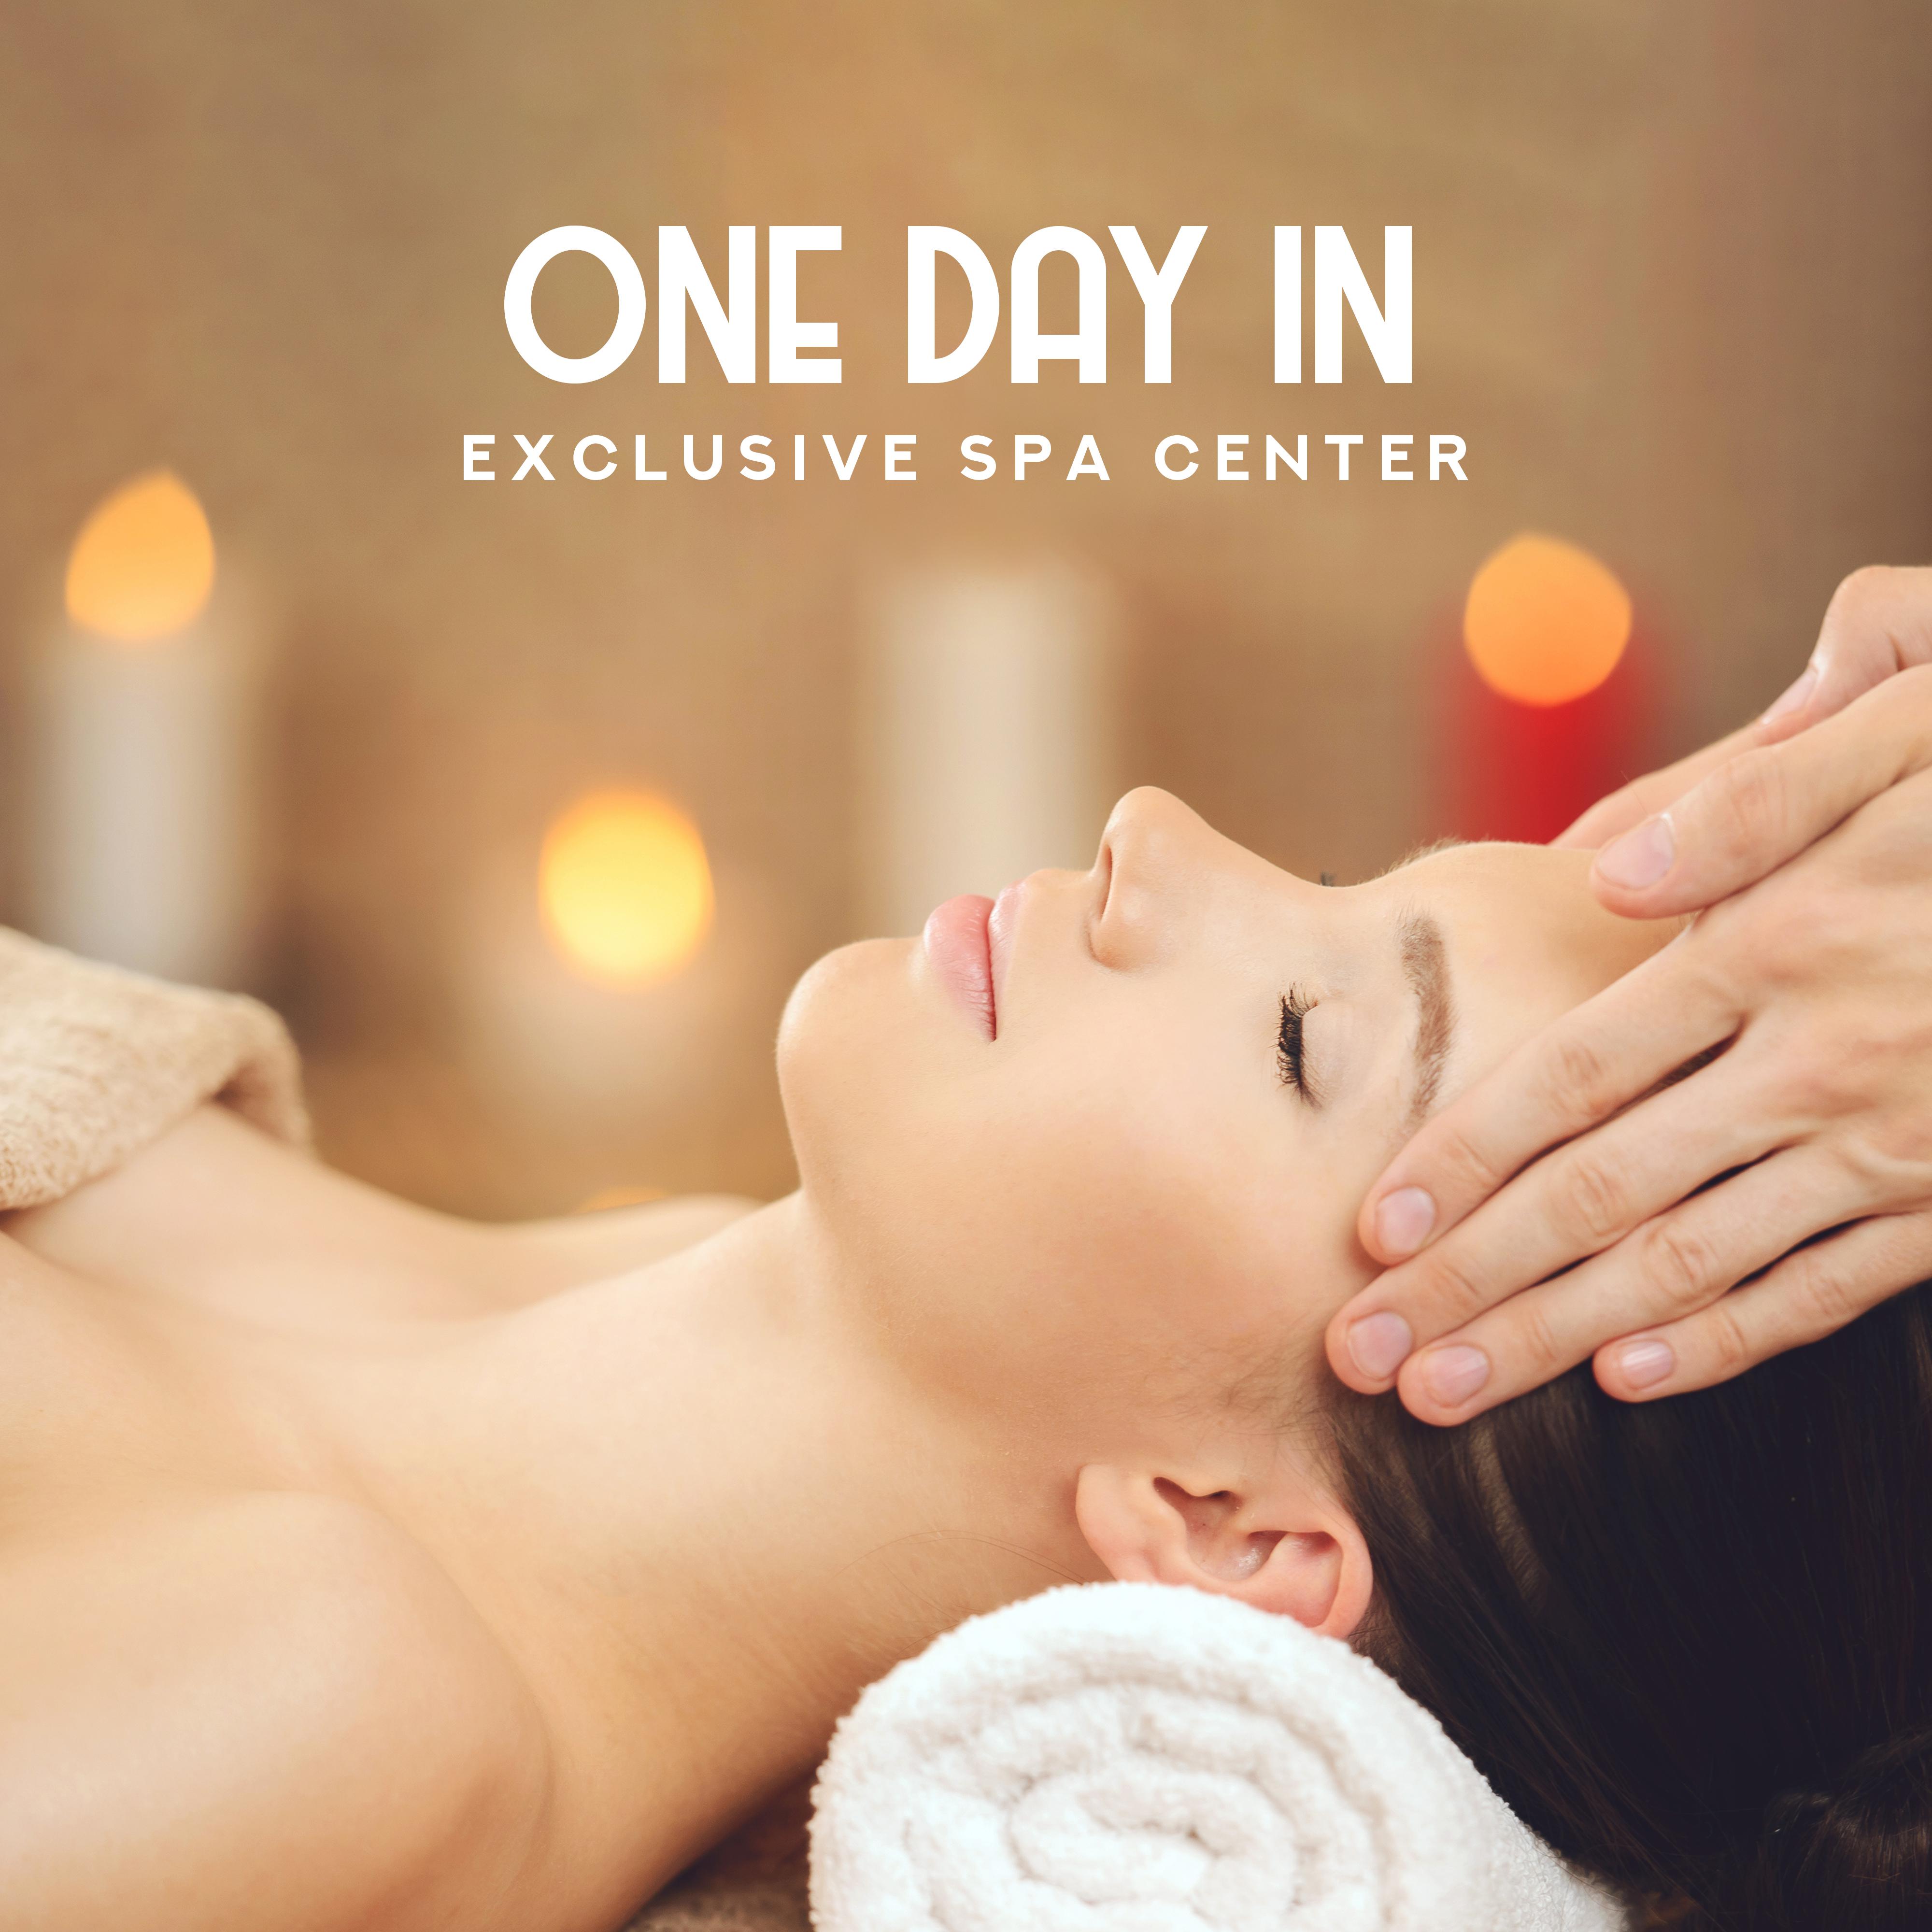 One Day in Exclusive Spa Center: New Age 2019 Most Relaxing Sounds for Spa & Wellness, Hot Oil Massage Therapy, Sauna, Baths